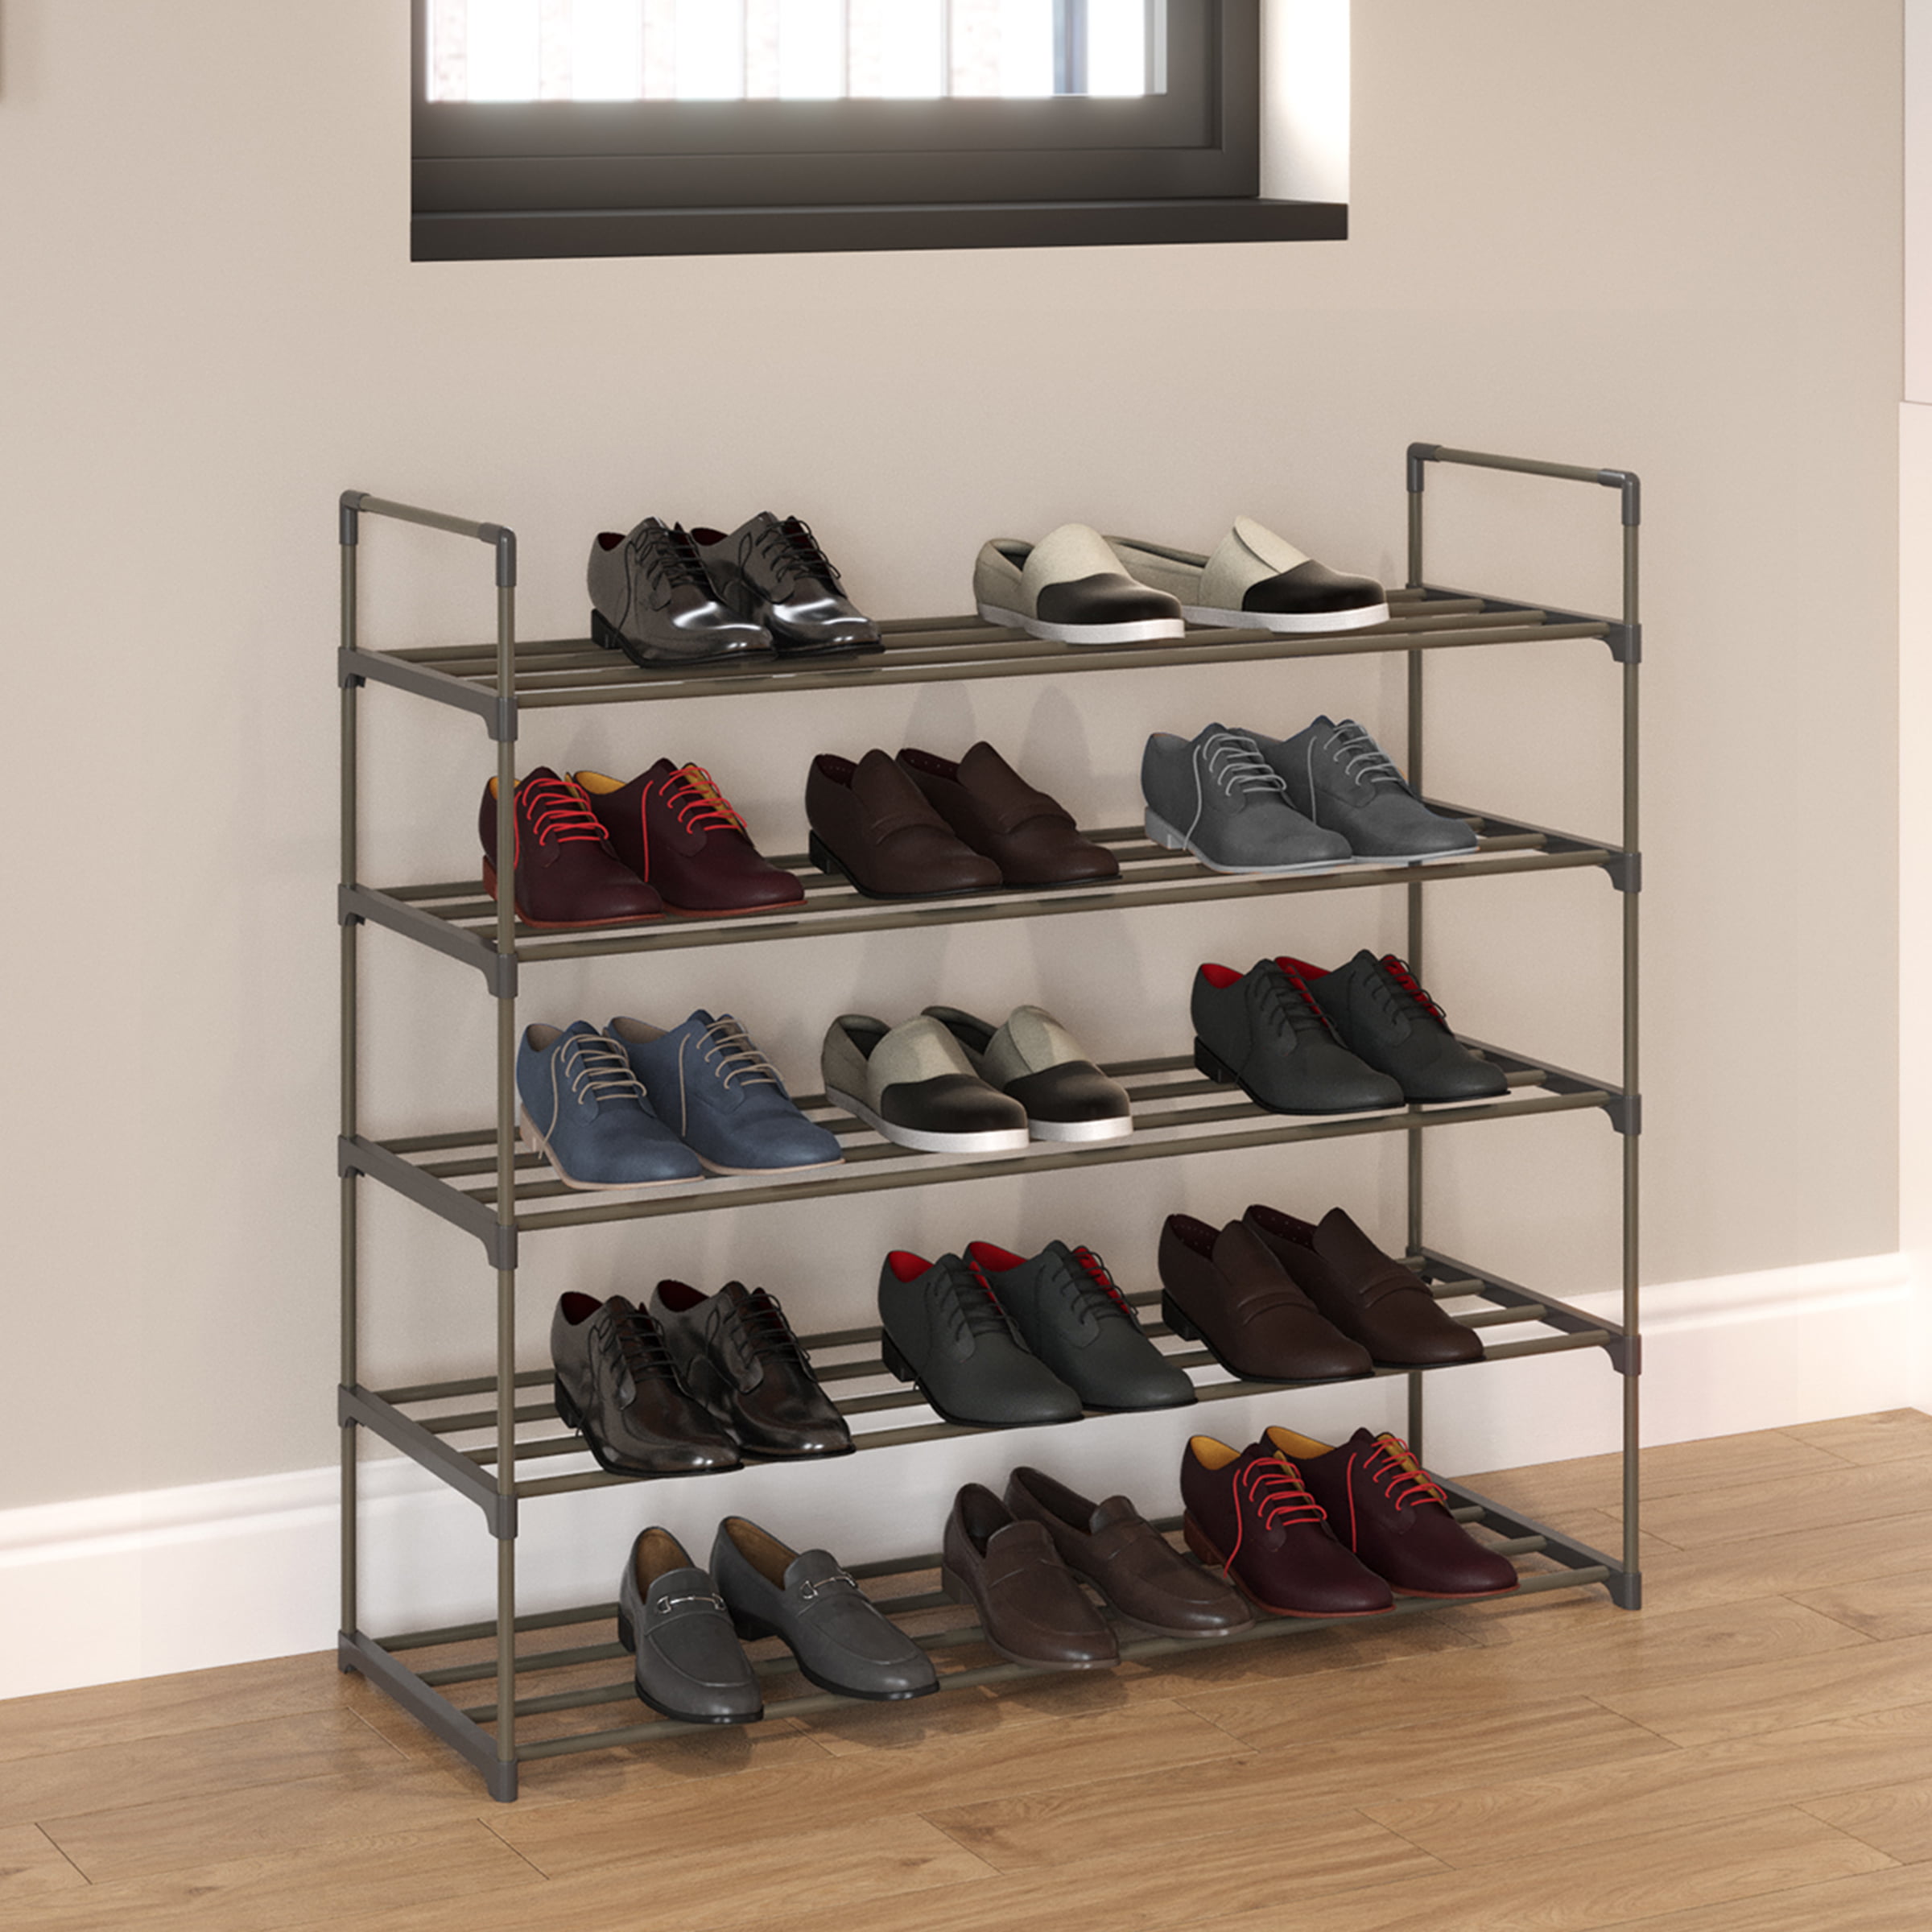  Awenia 5 Tiers Shoe Rack Organizer 30 Pairs,Adjustable Shoes  Shelf Tower Metal Tall for Closet with Spare Parts,DIY Assembly, Black :  Home & Kitchen